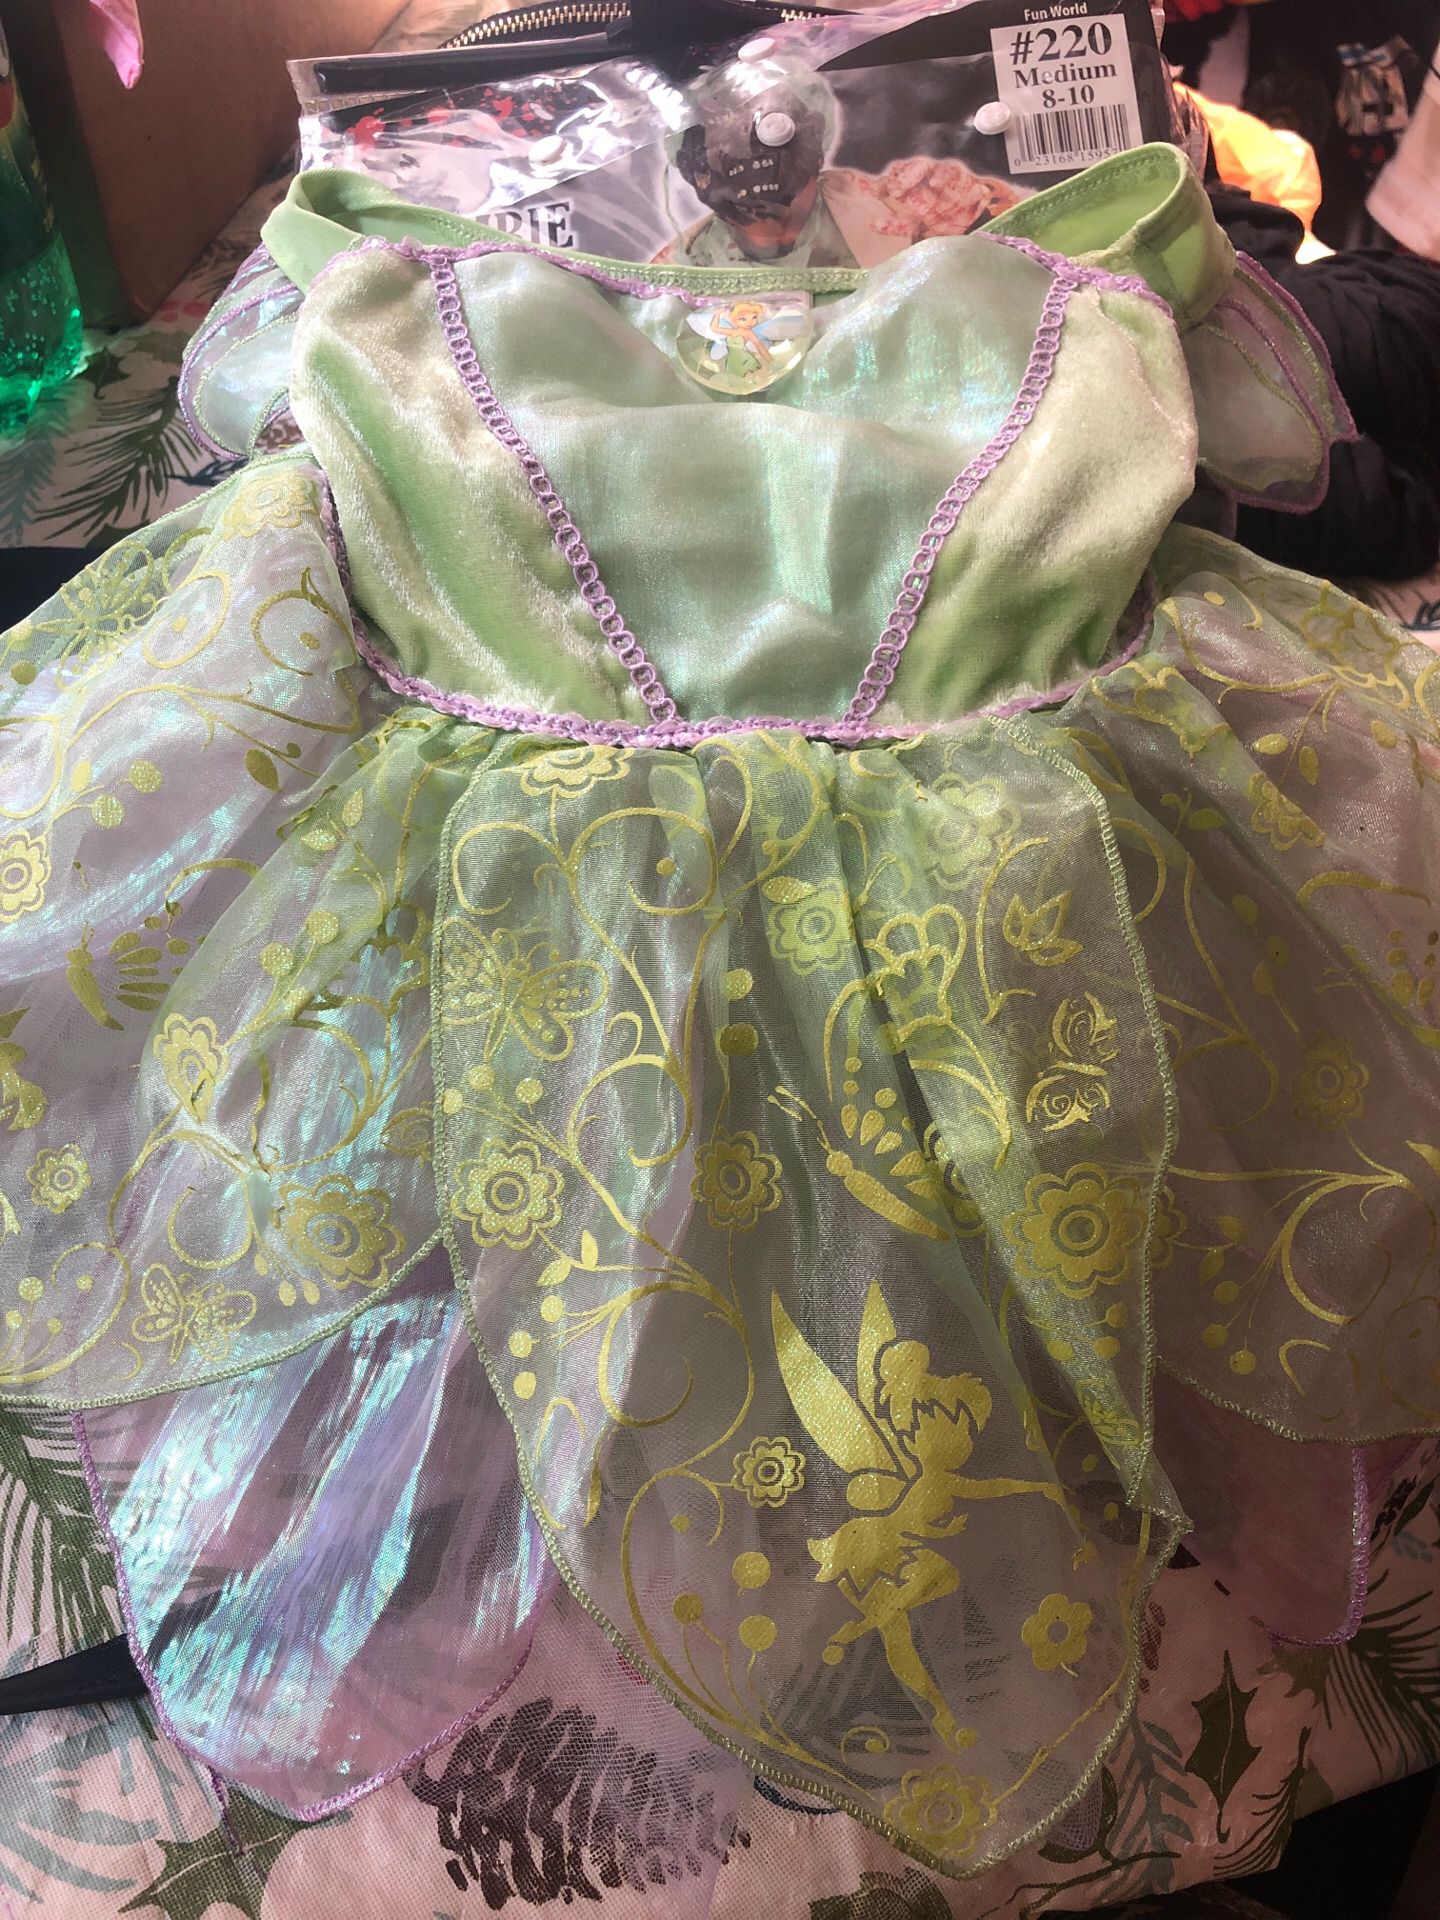 12-18 month Tinker bell costume